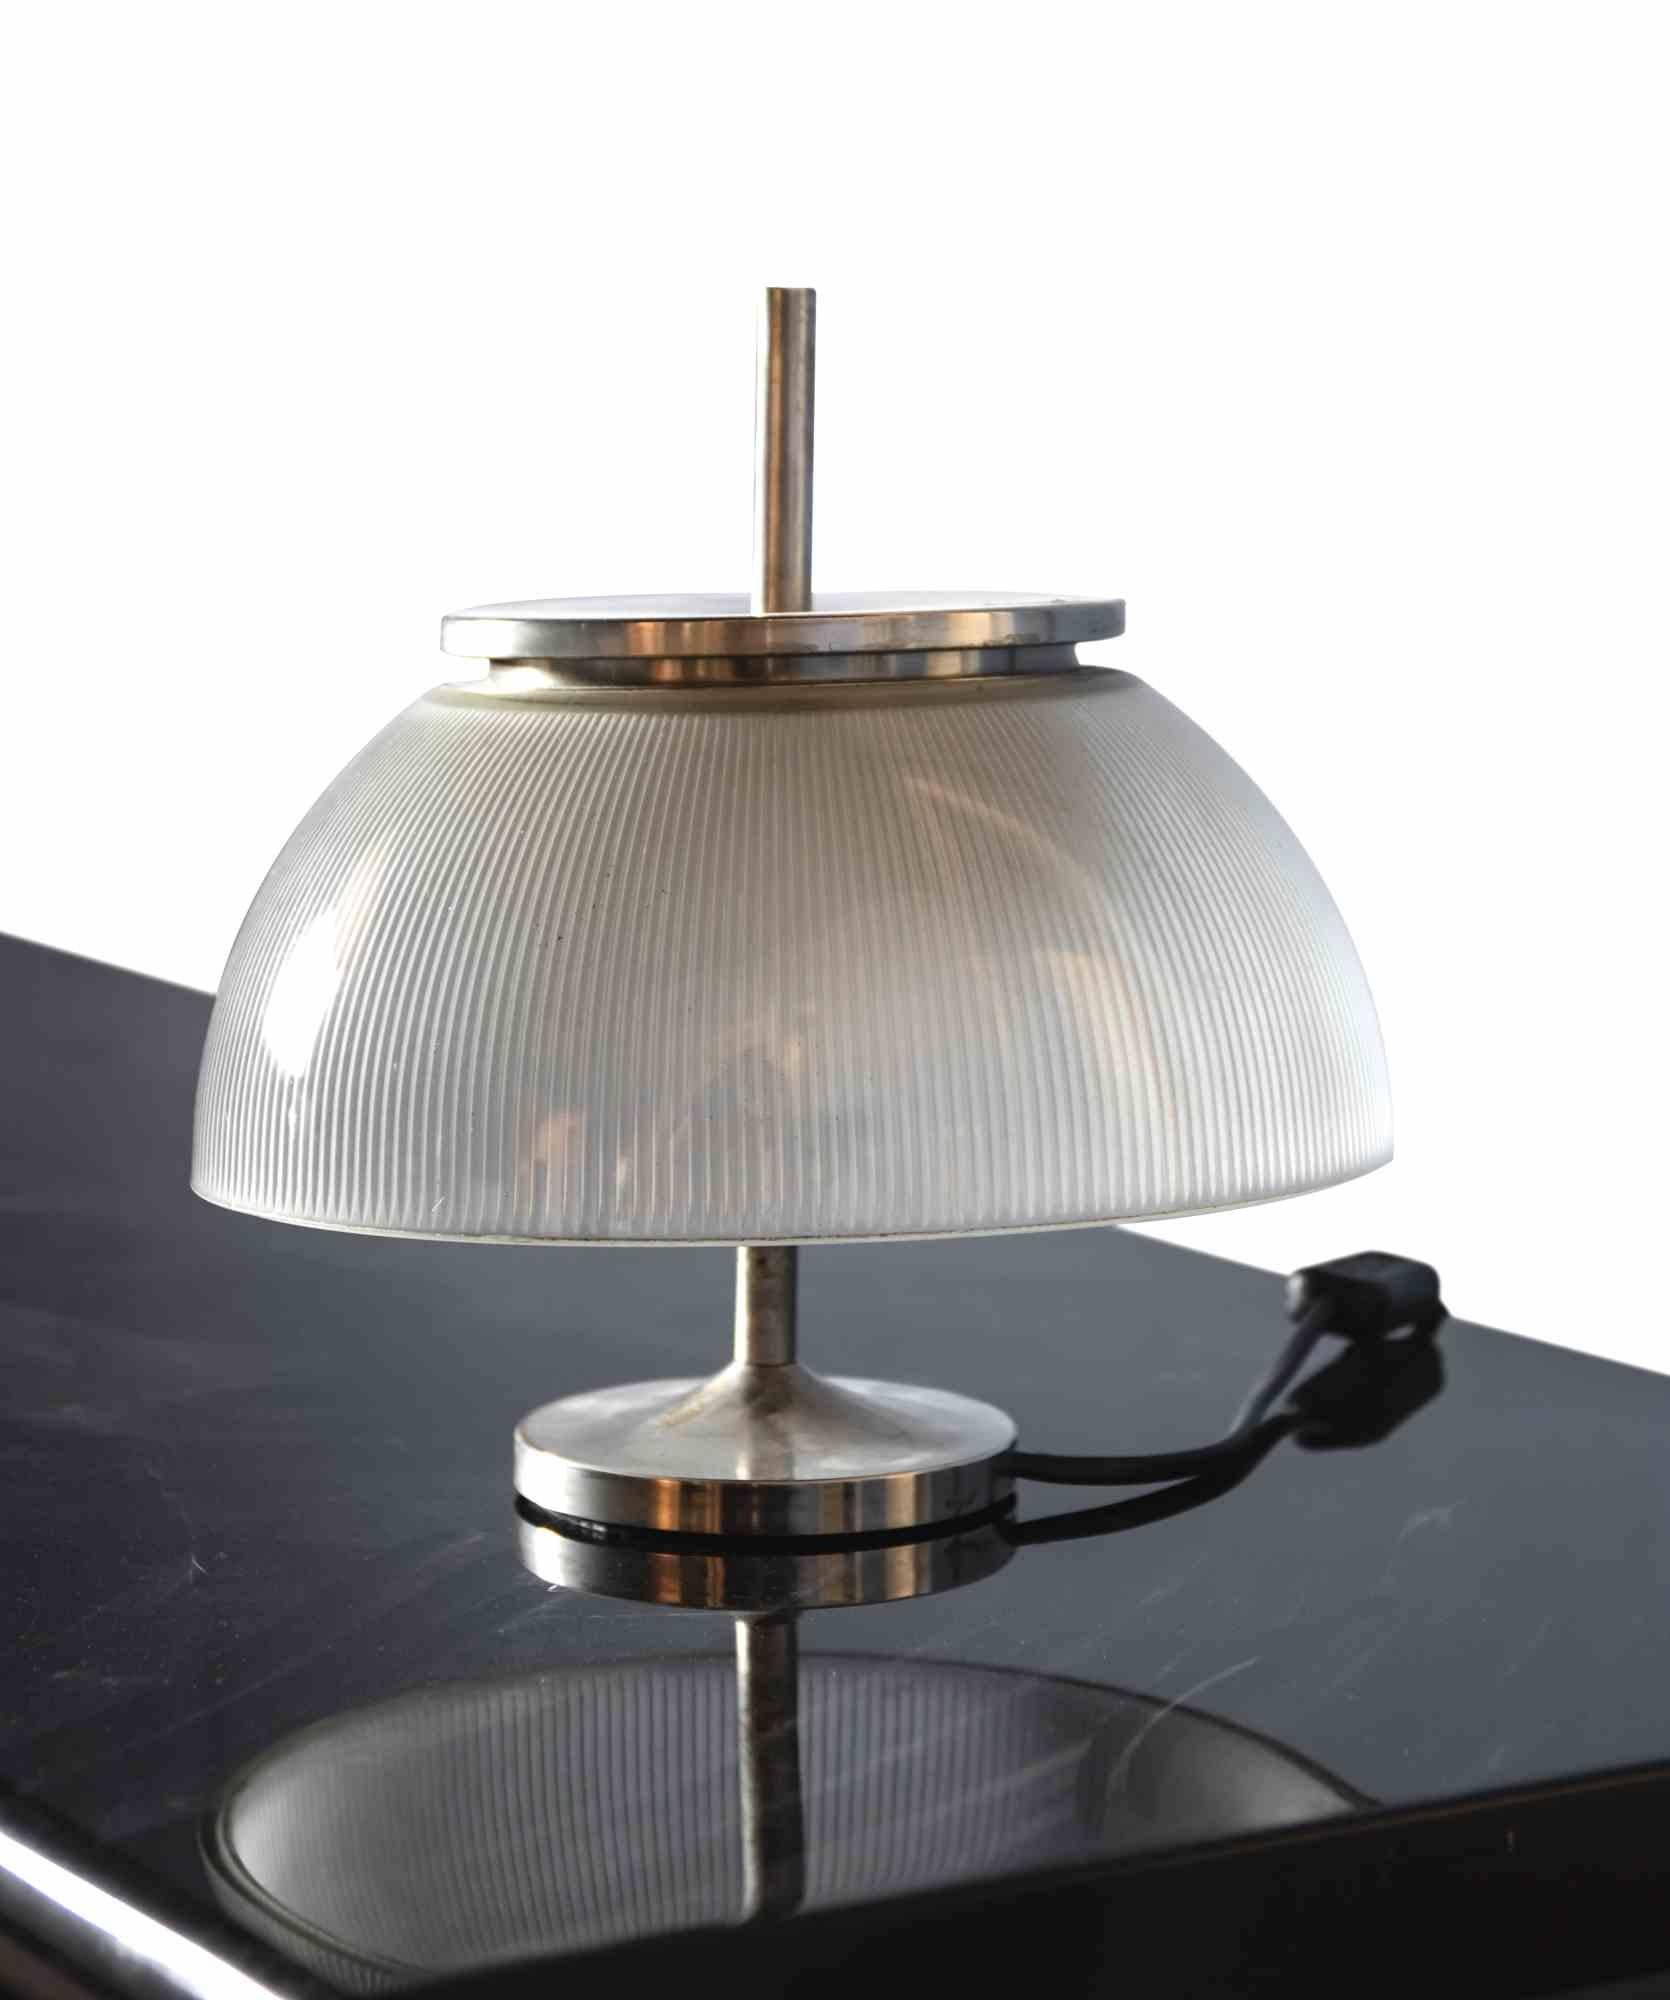 Pair of Alfetta table lamps is an original contemporary Artwork realized in Italy in the 1960s by Sergio Mazza. 

Metal and glass. 

Made in Italy.

Created for Artemide.

Total Dimensions: 26 cm x 25 cm x 25 cm.

Perfect